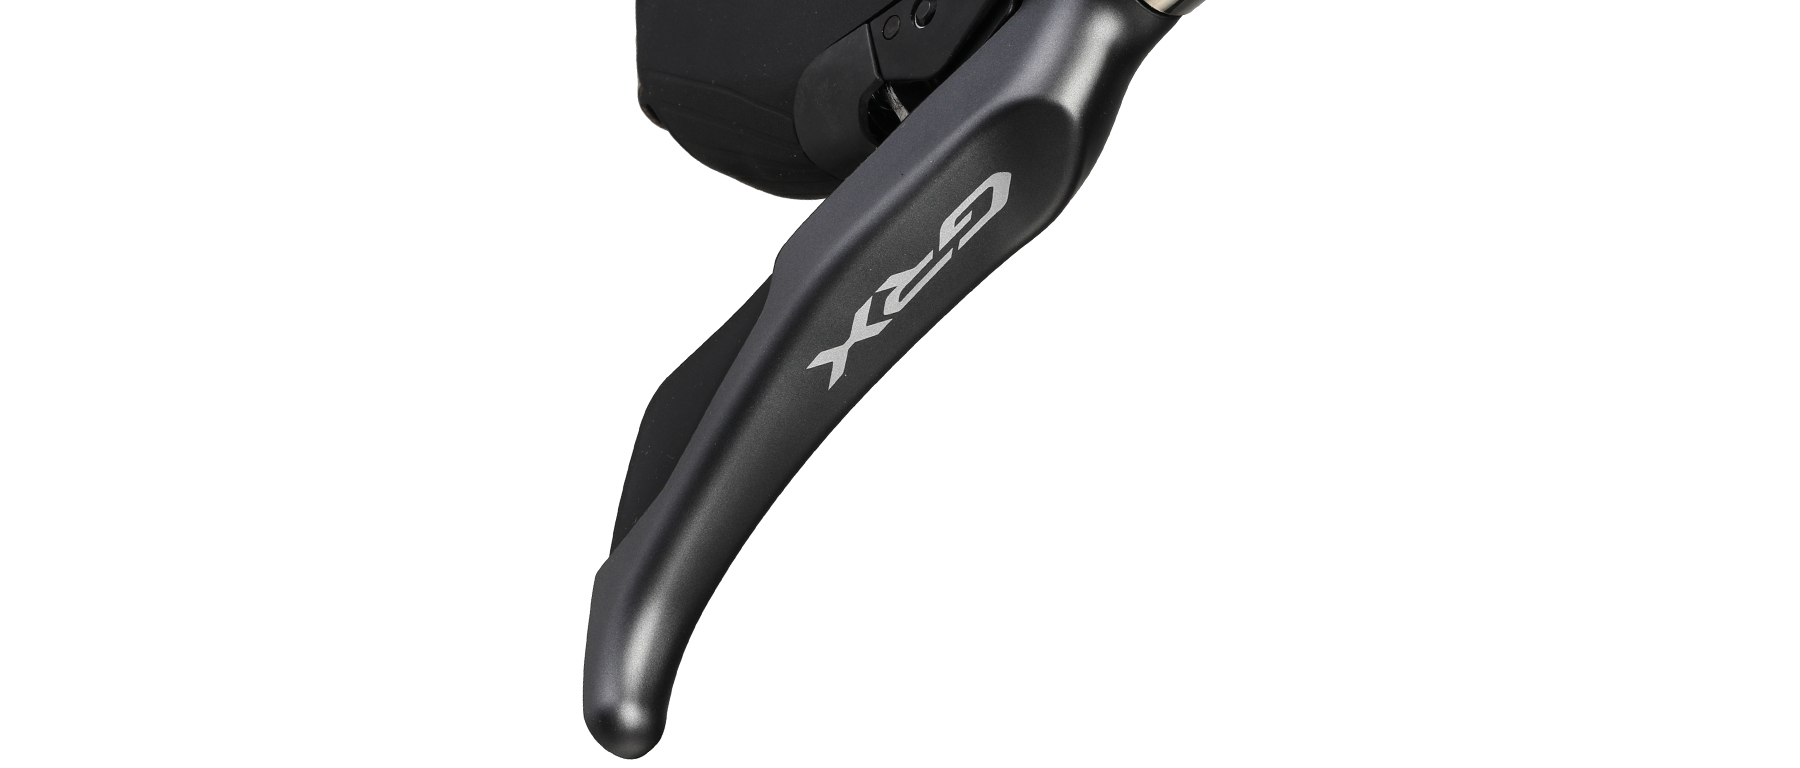 Shimano GRX ST-RX810 Dual Control Lever